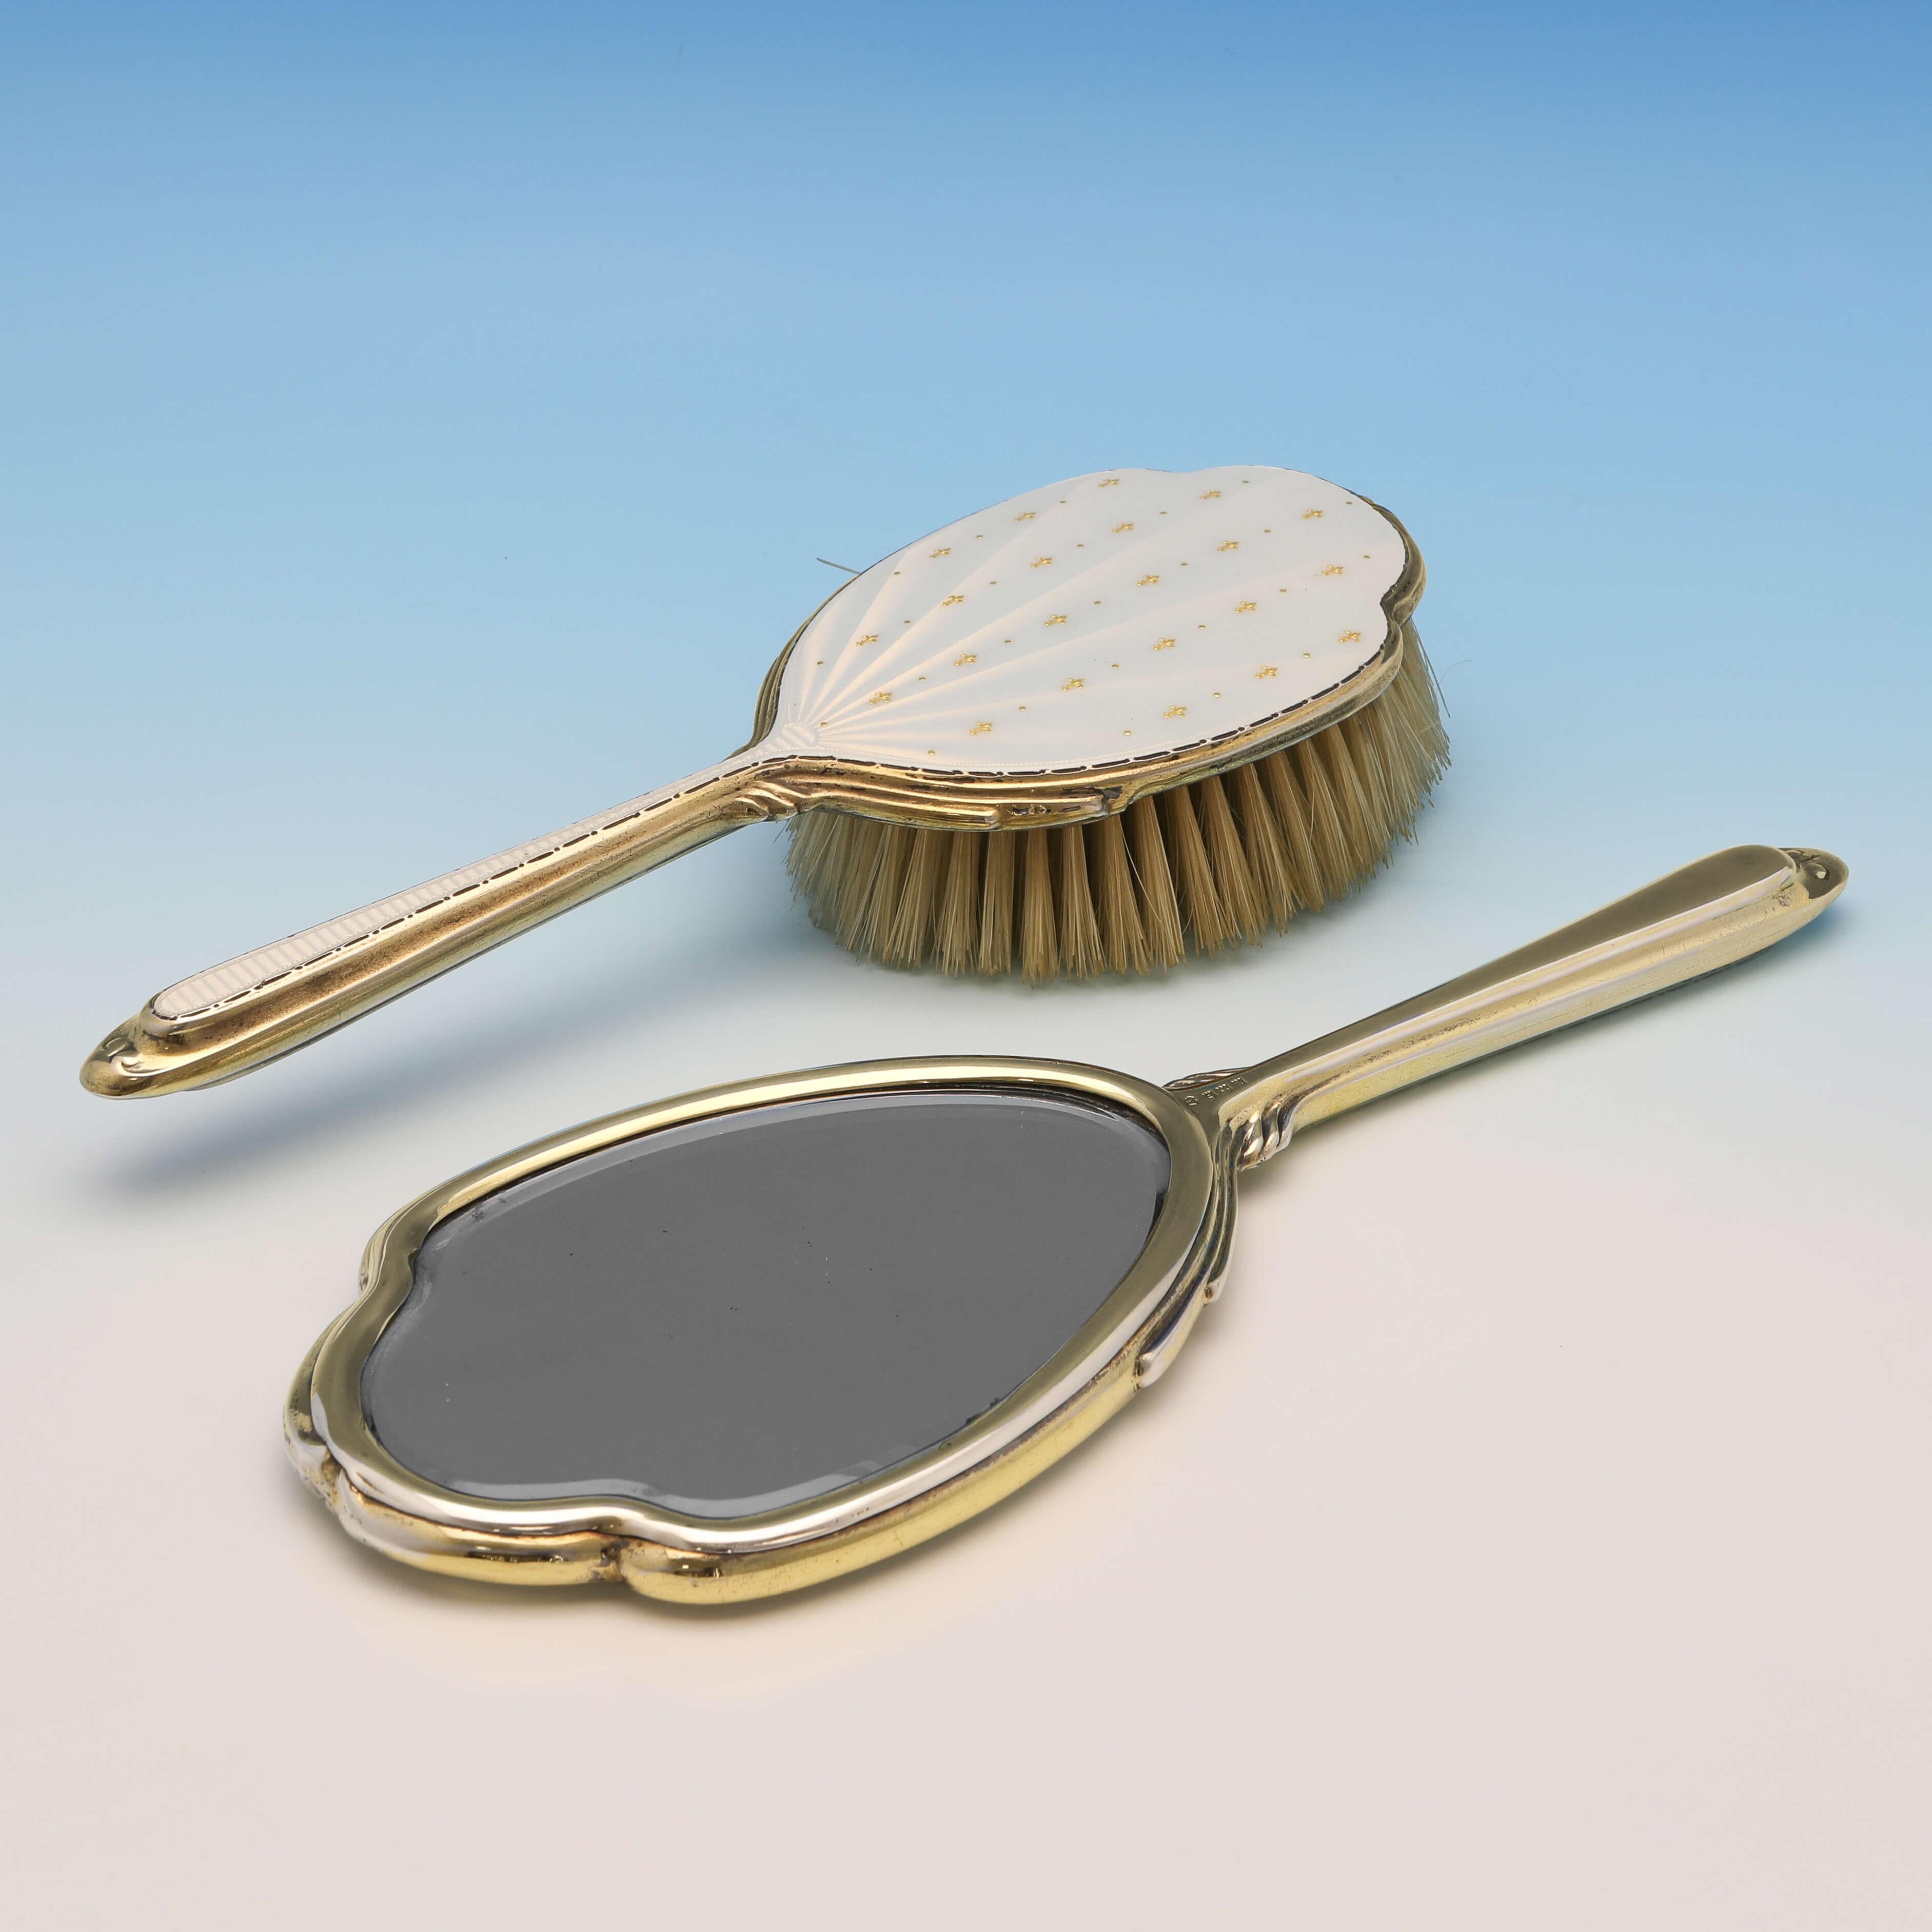 Hallmarked in Birmingham in 1961 by Albert Carter, this very attractive, sterling silver dressing table set, is gilt, and features enamelled decoration to the backs of each piece. The hand mirror measures 11.25